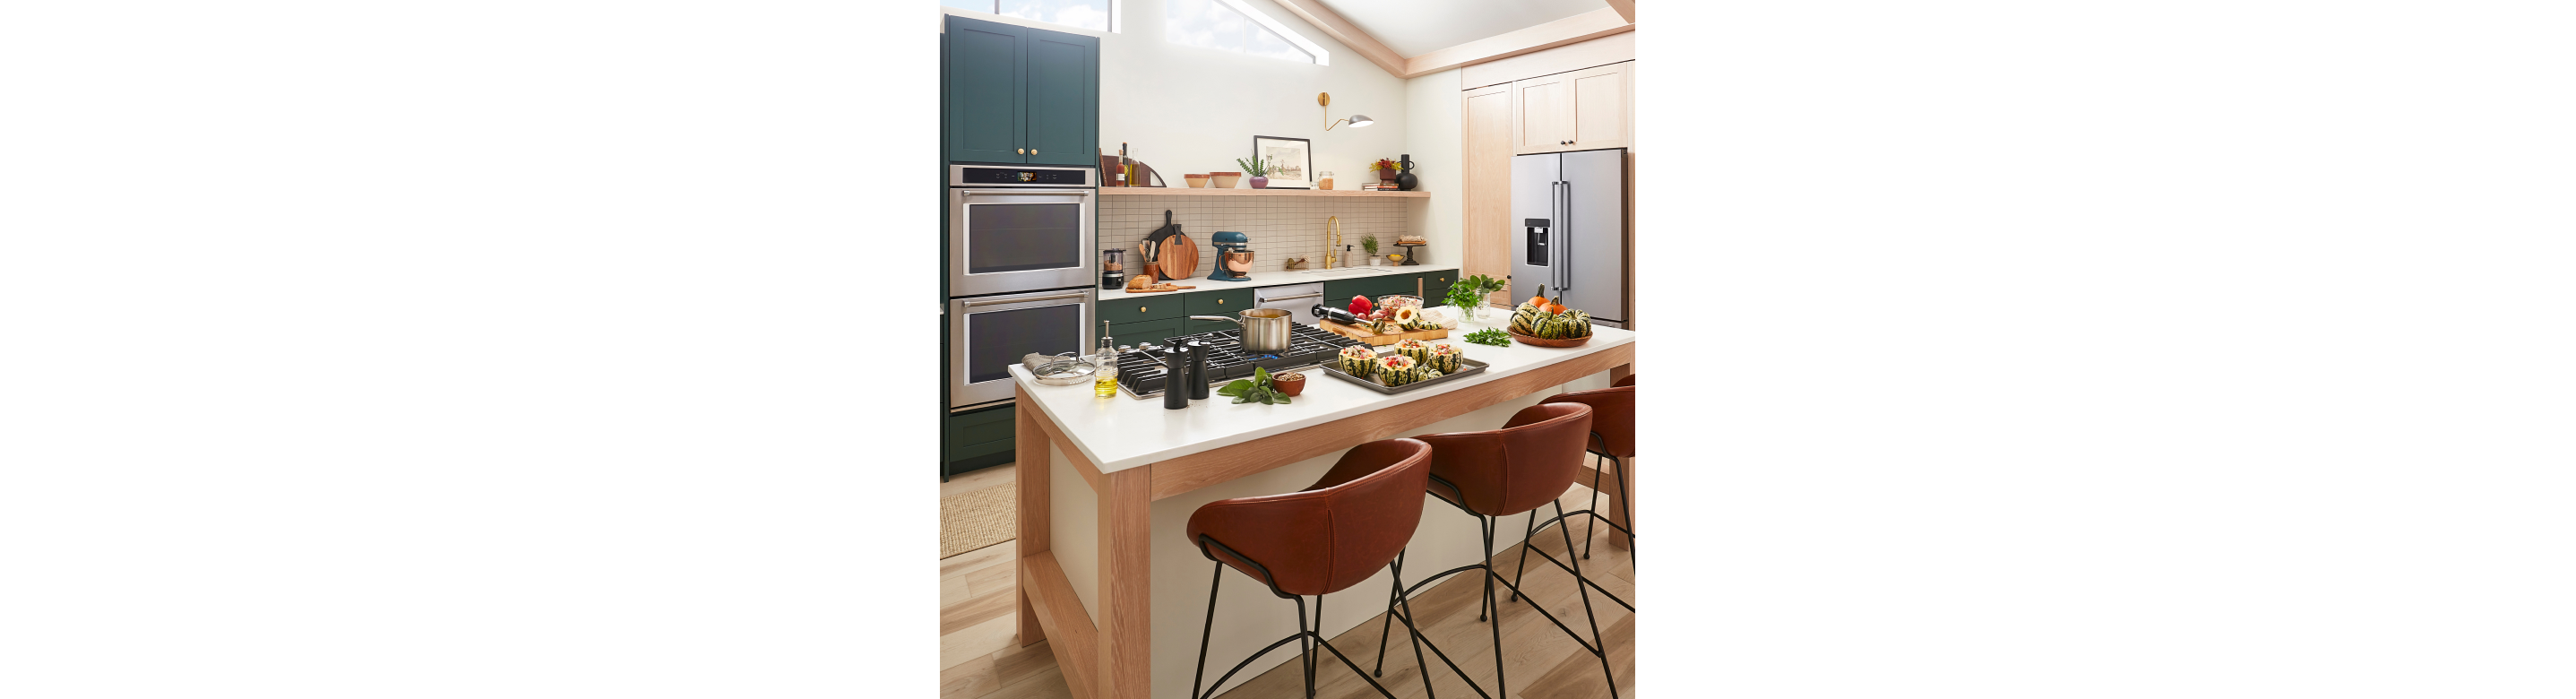 7 Ideas for Creating a Kitchen Designed for Entertaining